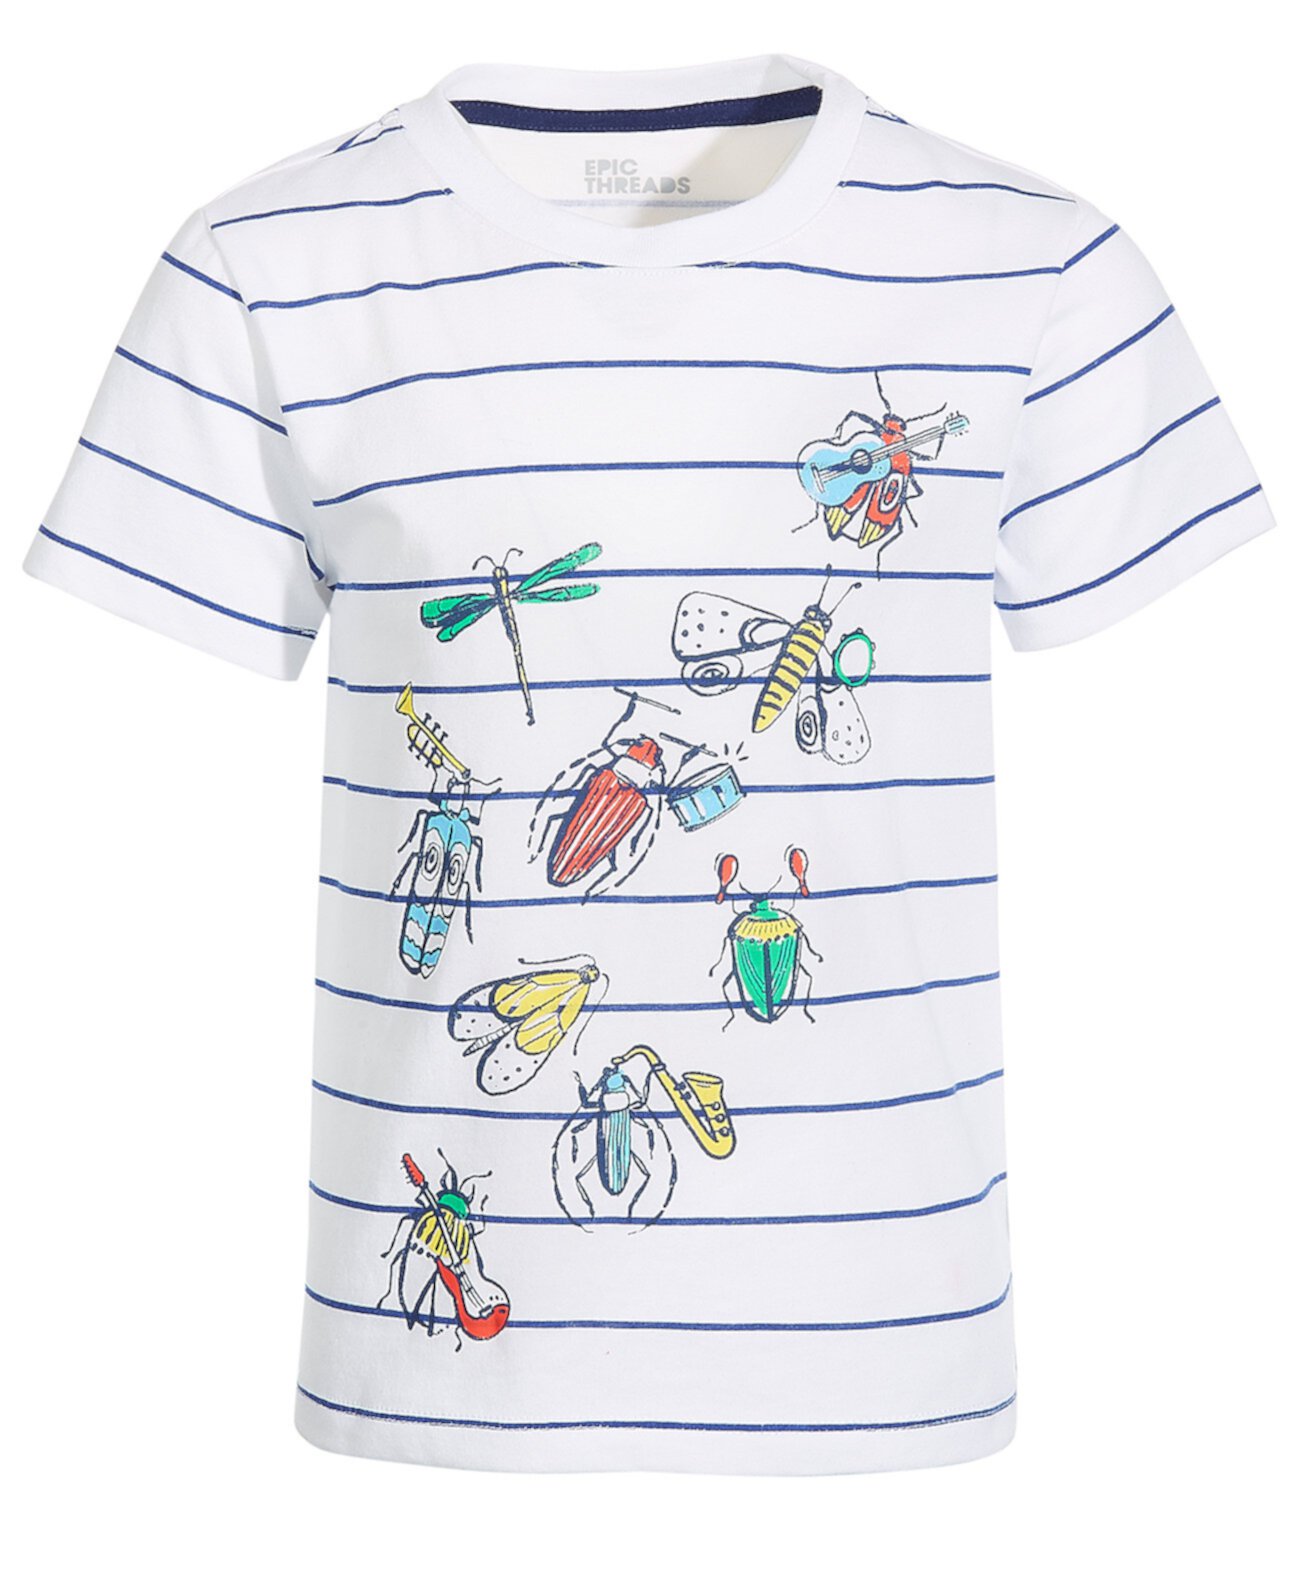 Toddler & Little Boys Rockin' Bugs Graphic T-Shirt, Created for Macy's Epic Threads